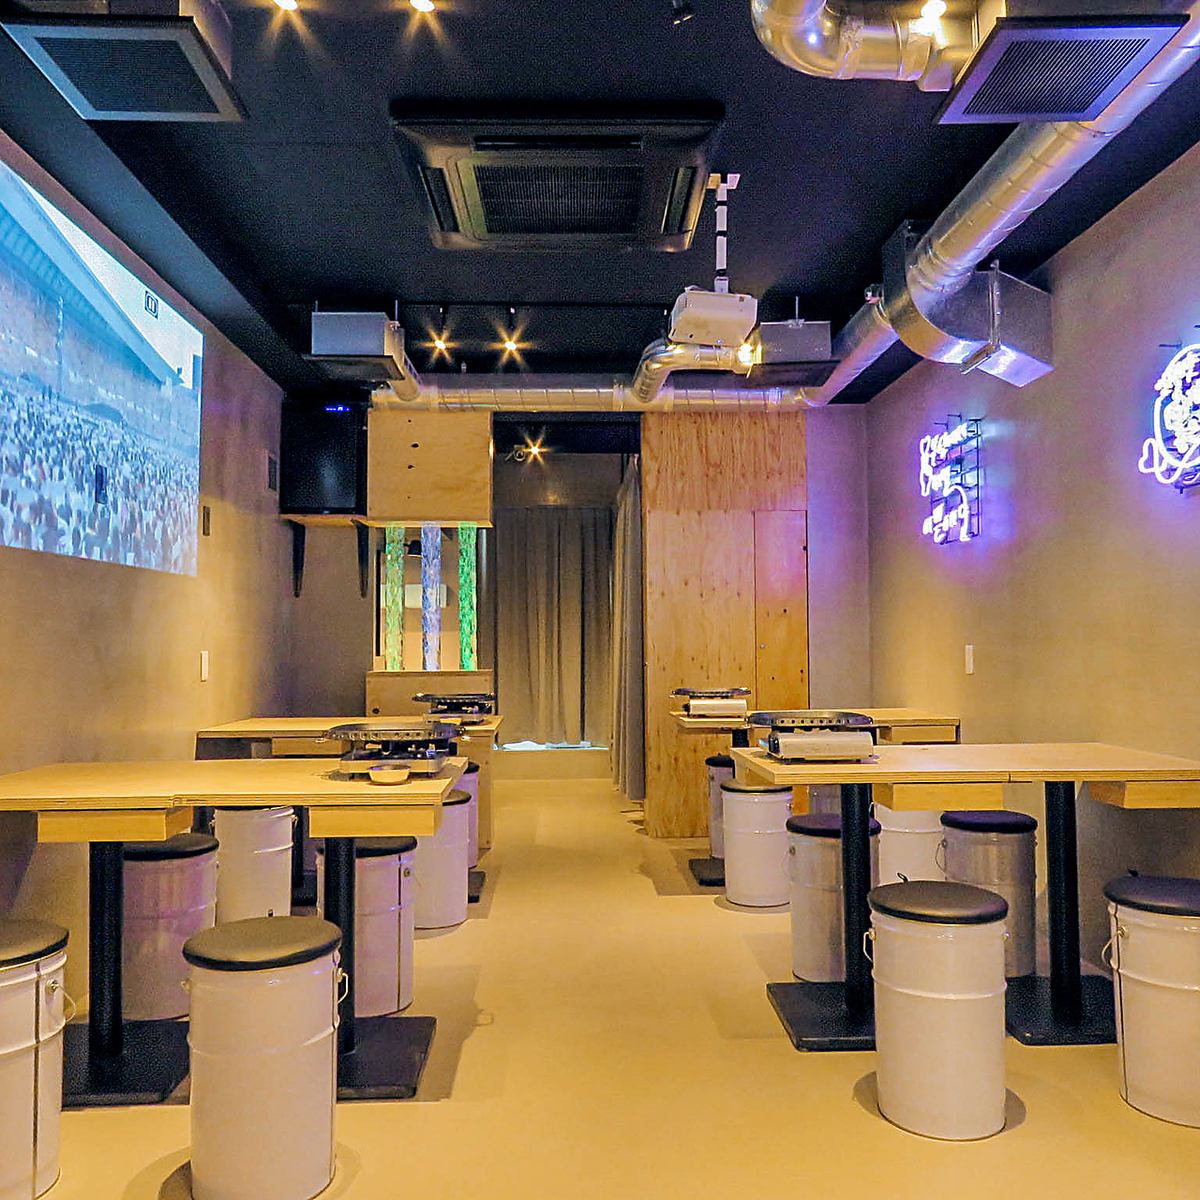 The stylish interior of the restaurant gives off the atmosphere of a real Seoul izakaya!